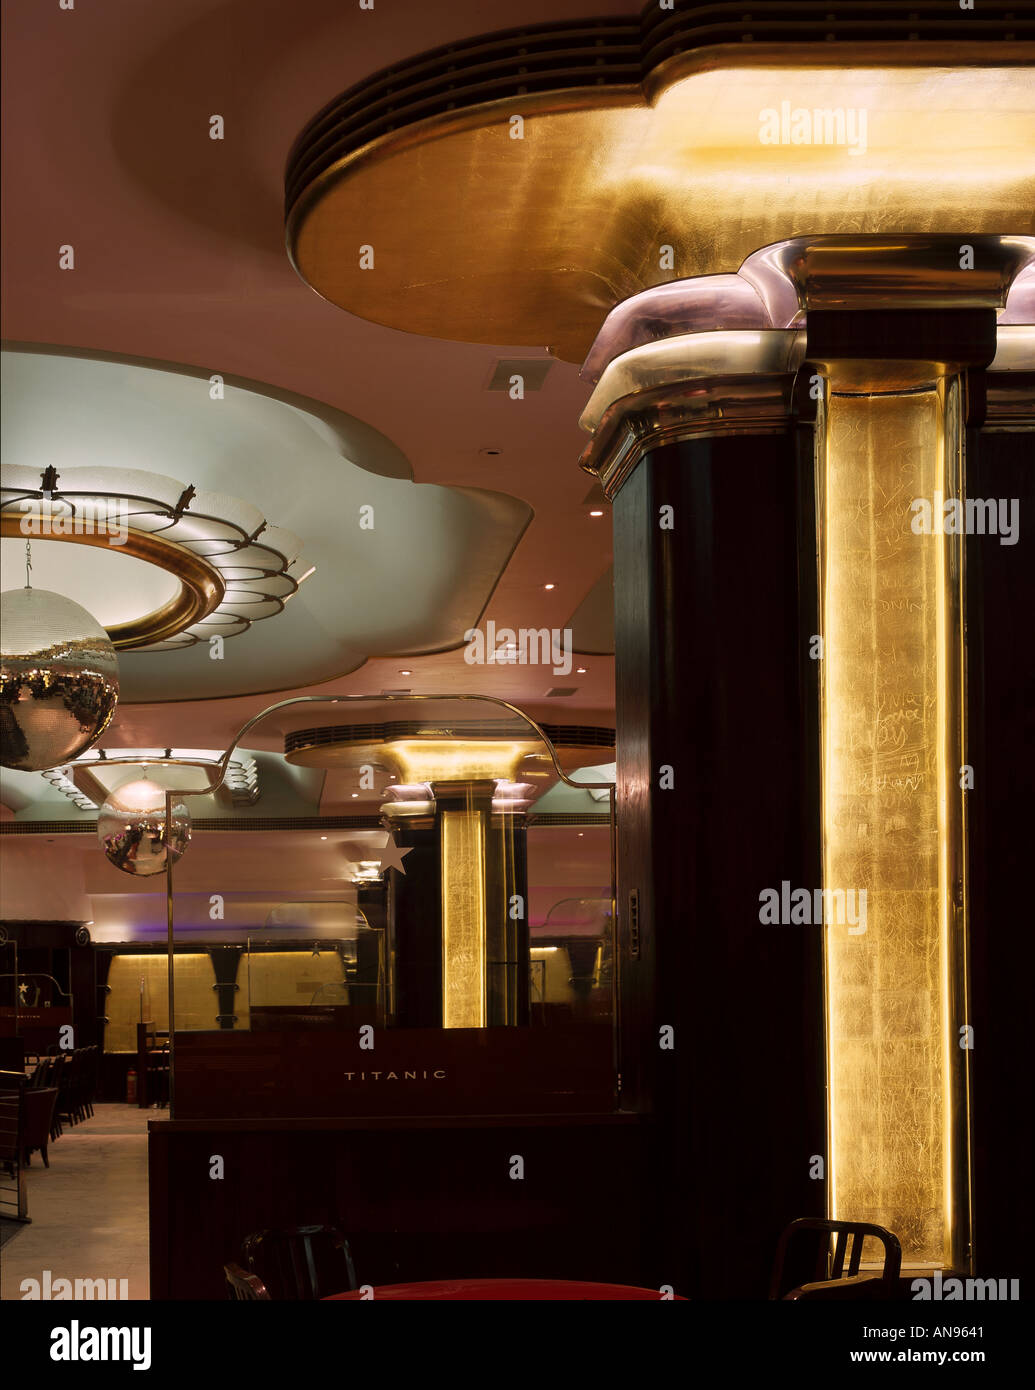 Titanic Restaurant, Piccadilly, London. Former Marco Pierre White restaurant. Detail of supports and ceiling. Stock Photo